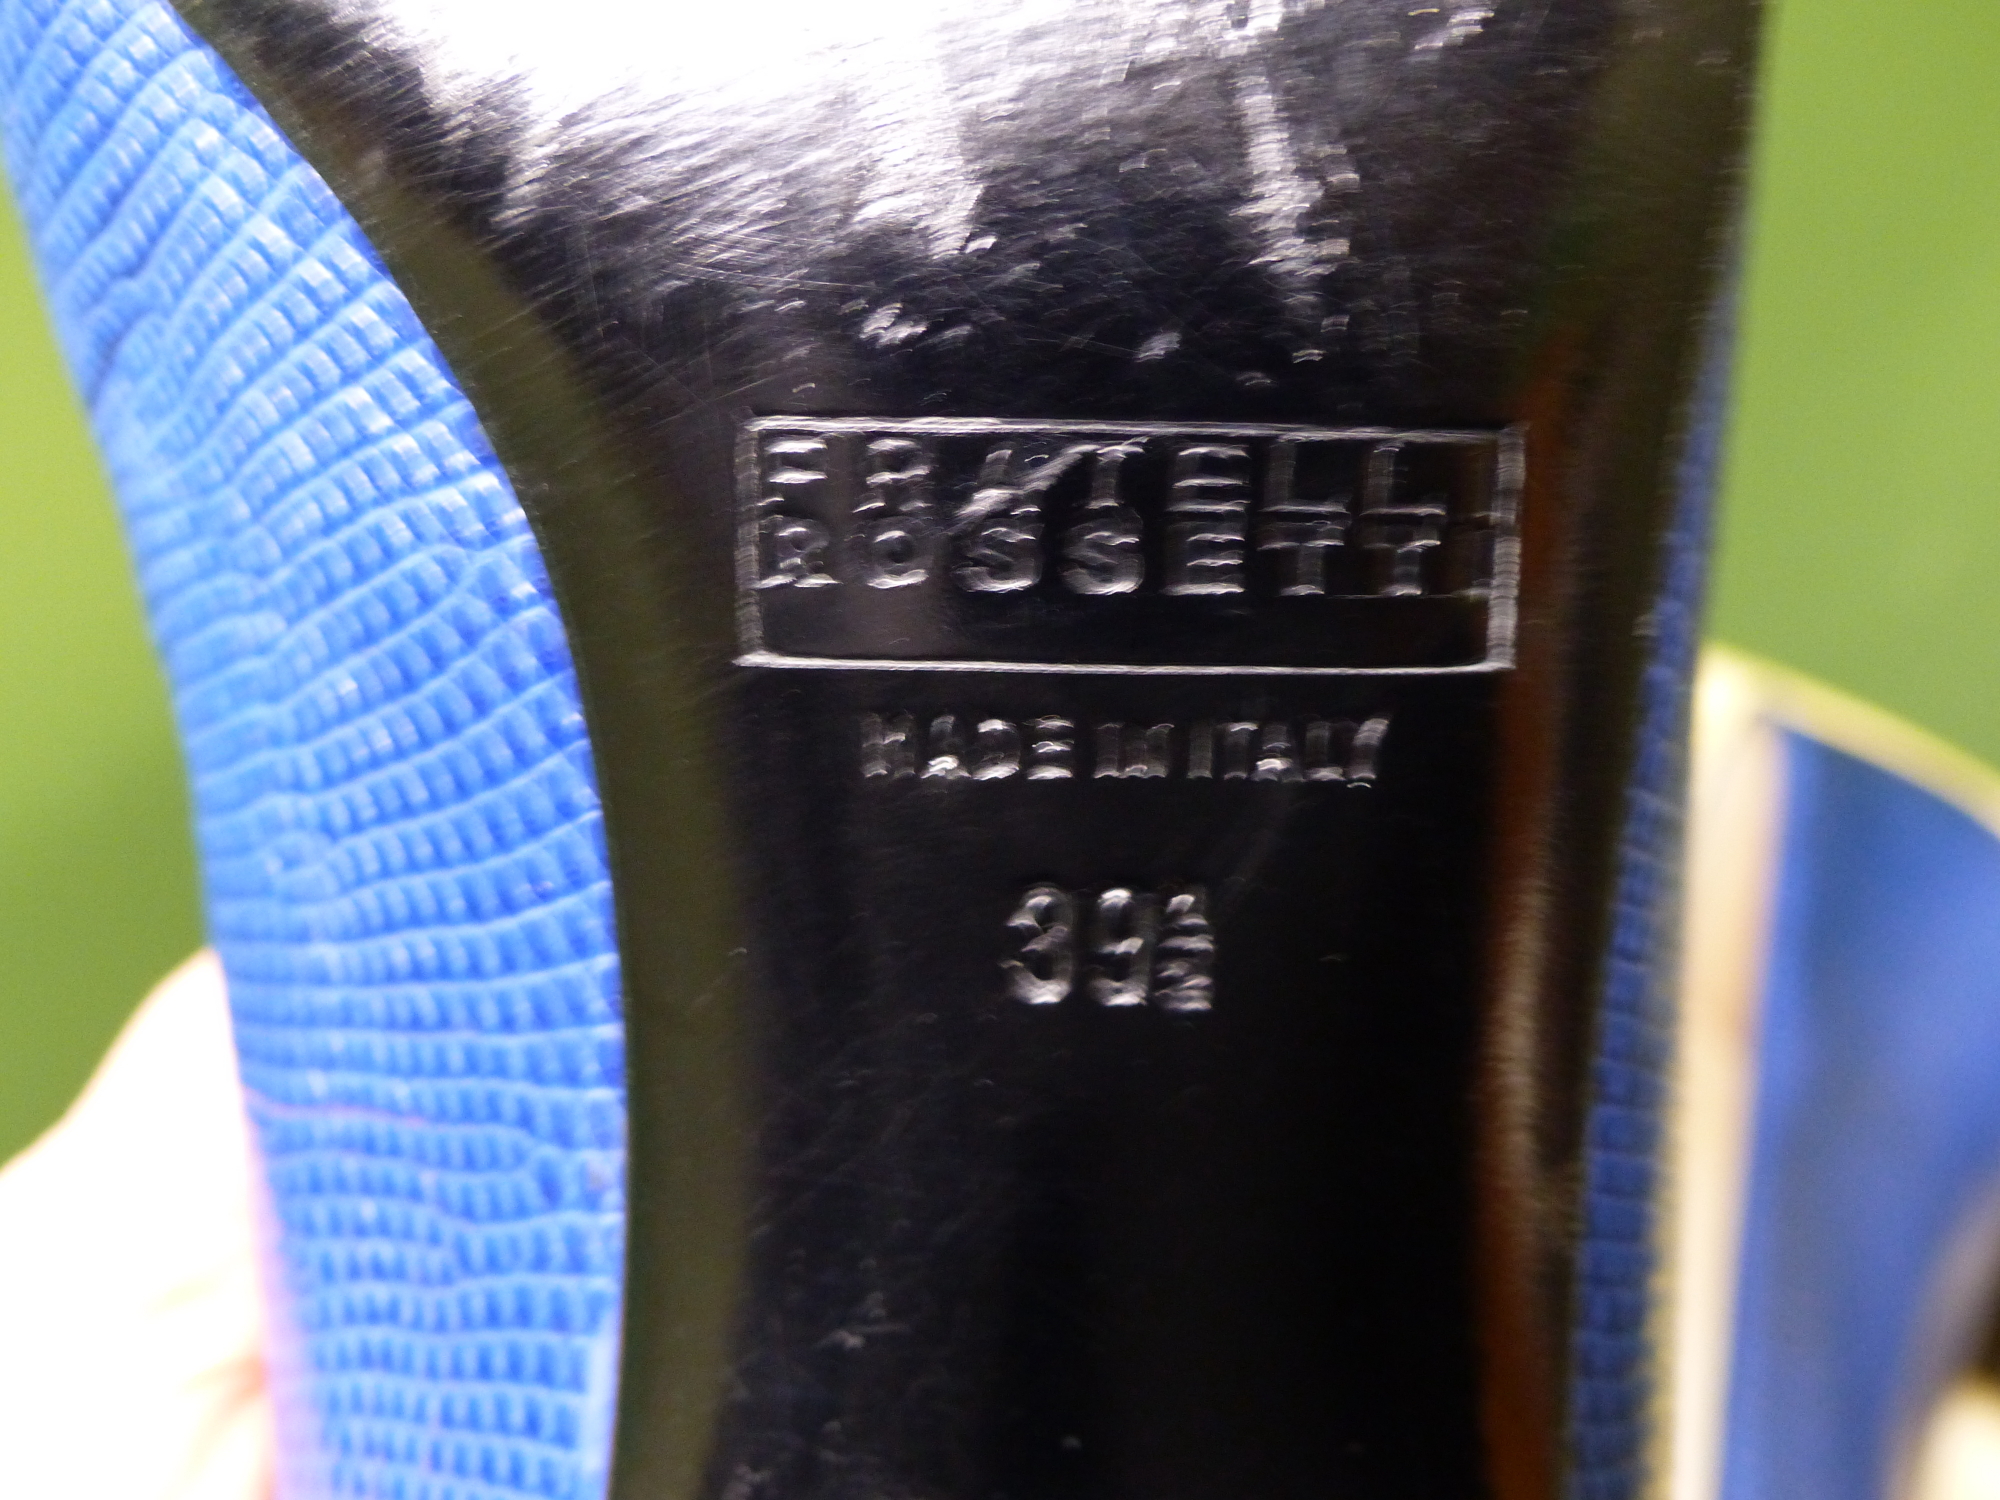 SHOES. FRATELL ROSSETTI BLUE CROC STYLE EUR SIZE 39.5, TOGETHER WITH PETER KAISER CAFE SUEDE UK SIZE - Image 7 of 12